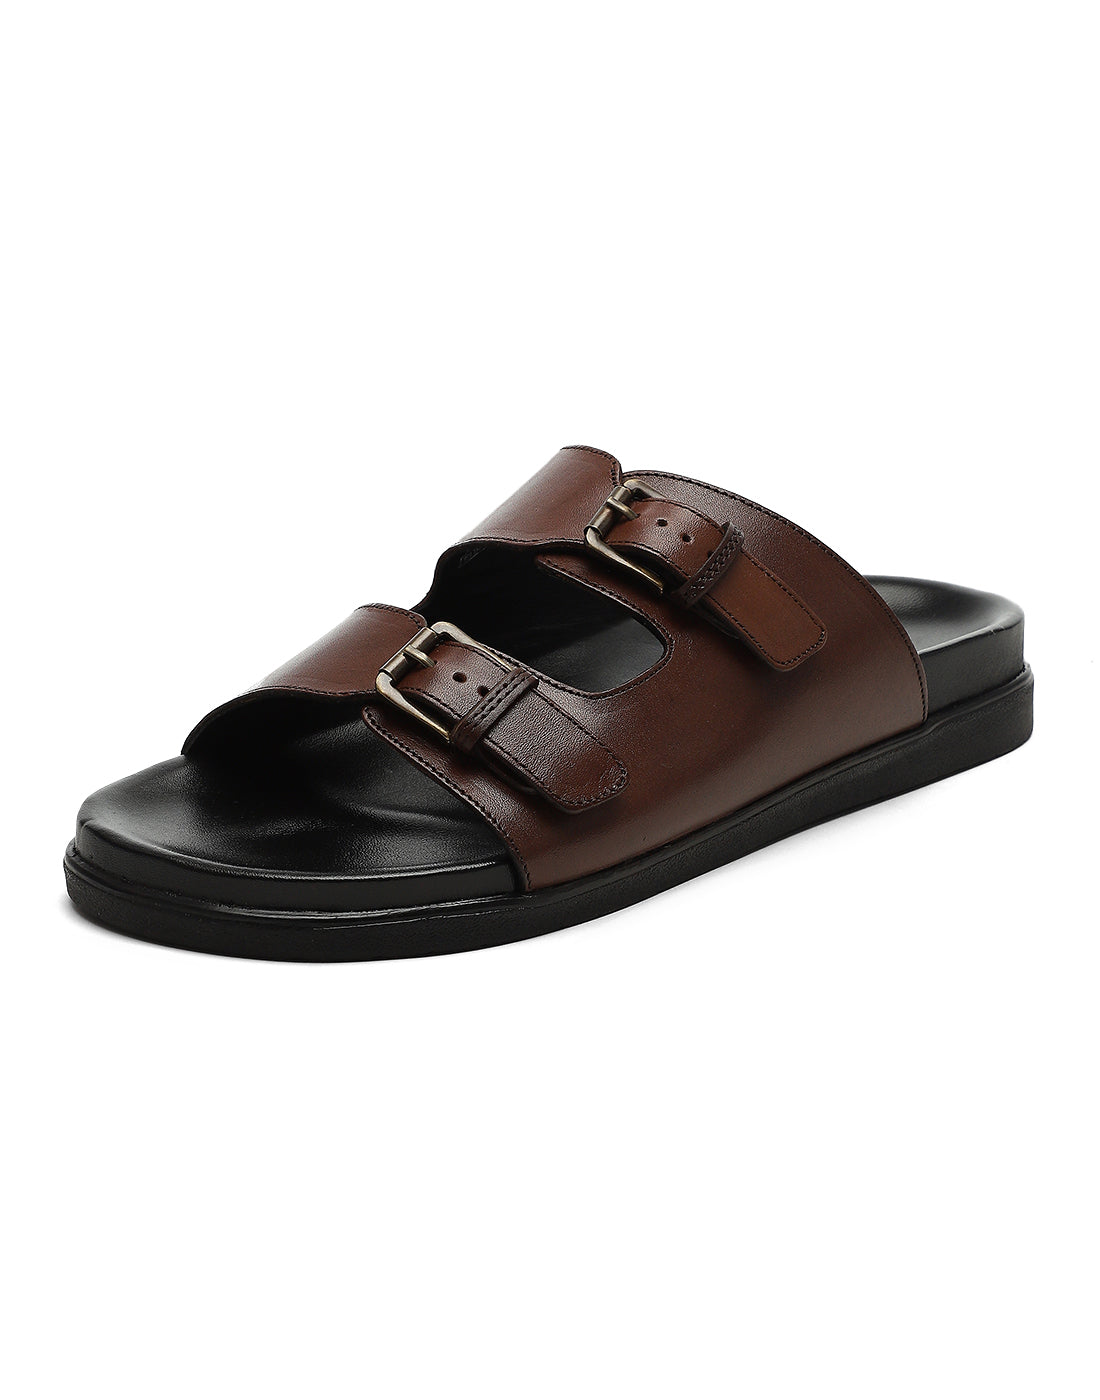 Men Brown Leather Comfort Casual Slippers